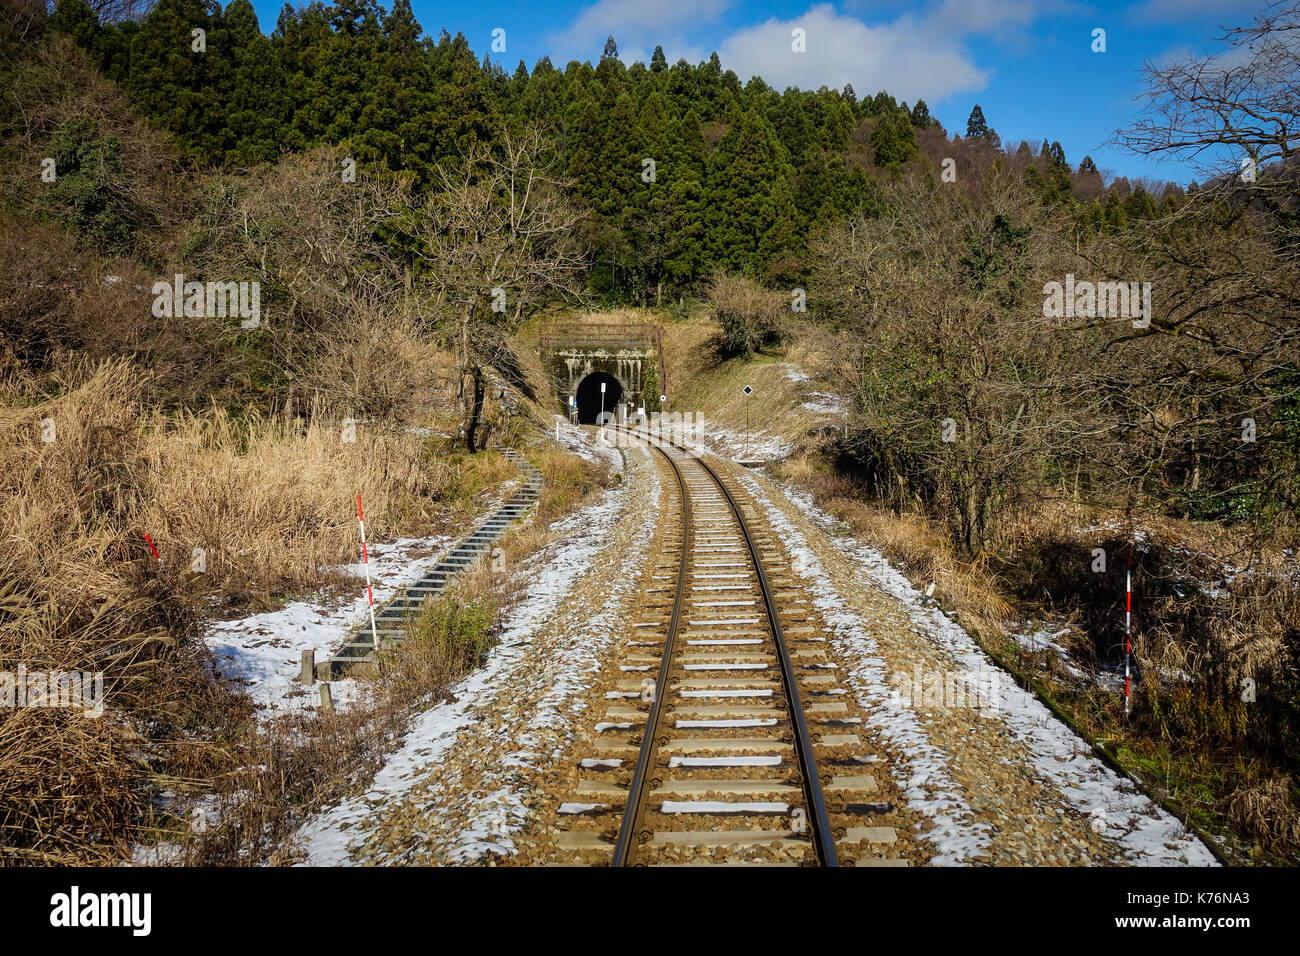 A railtrack with snow in Nagano, Japan. Nagano Prefecture (Nagano-ken) is a landlocked prefecture of Japan located in the Chubu region. Stock Photo